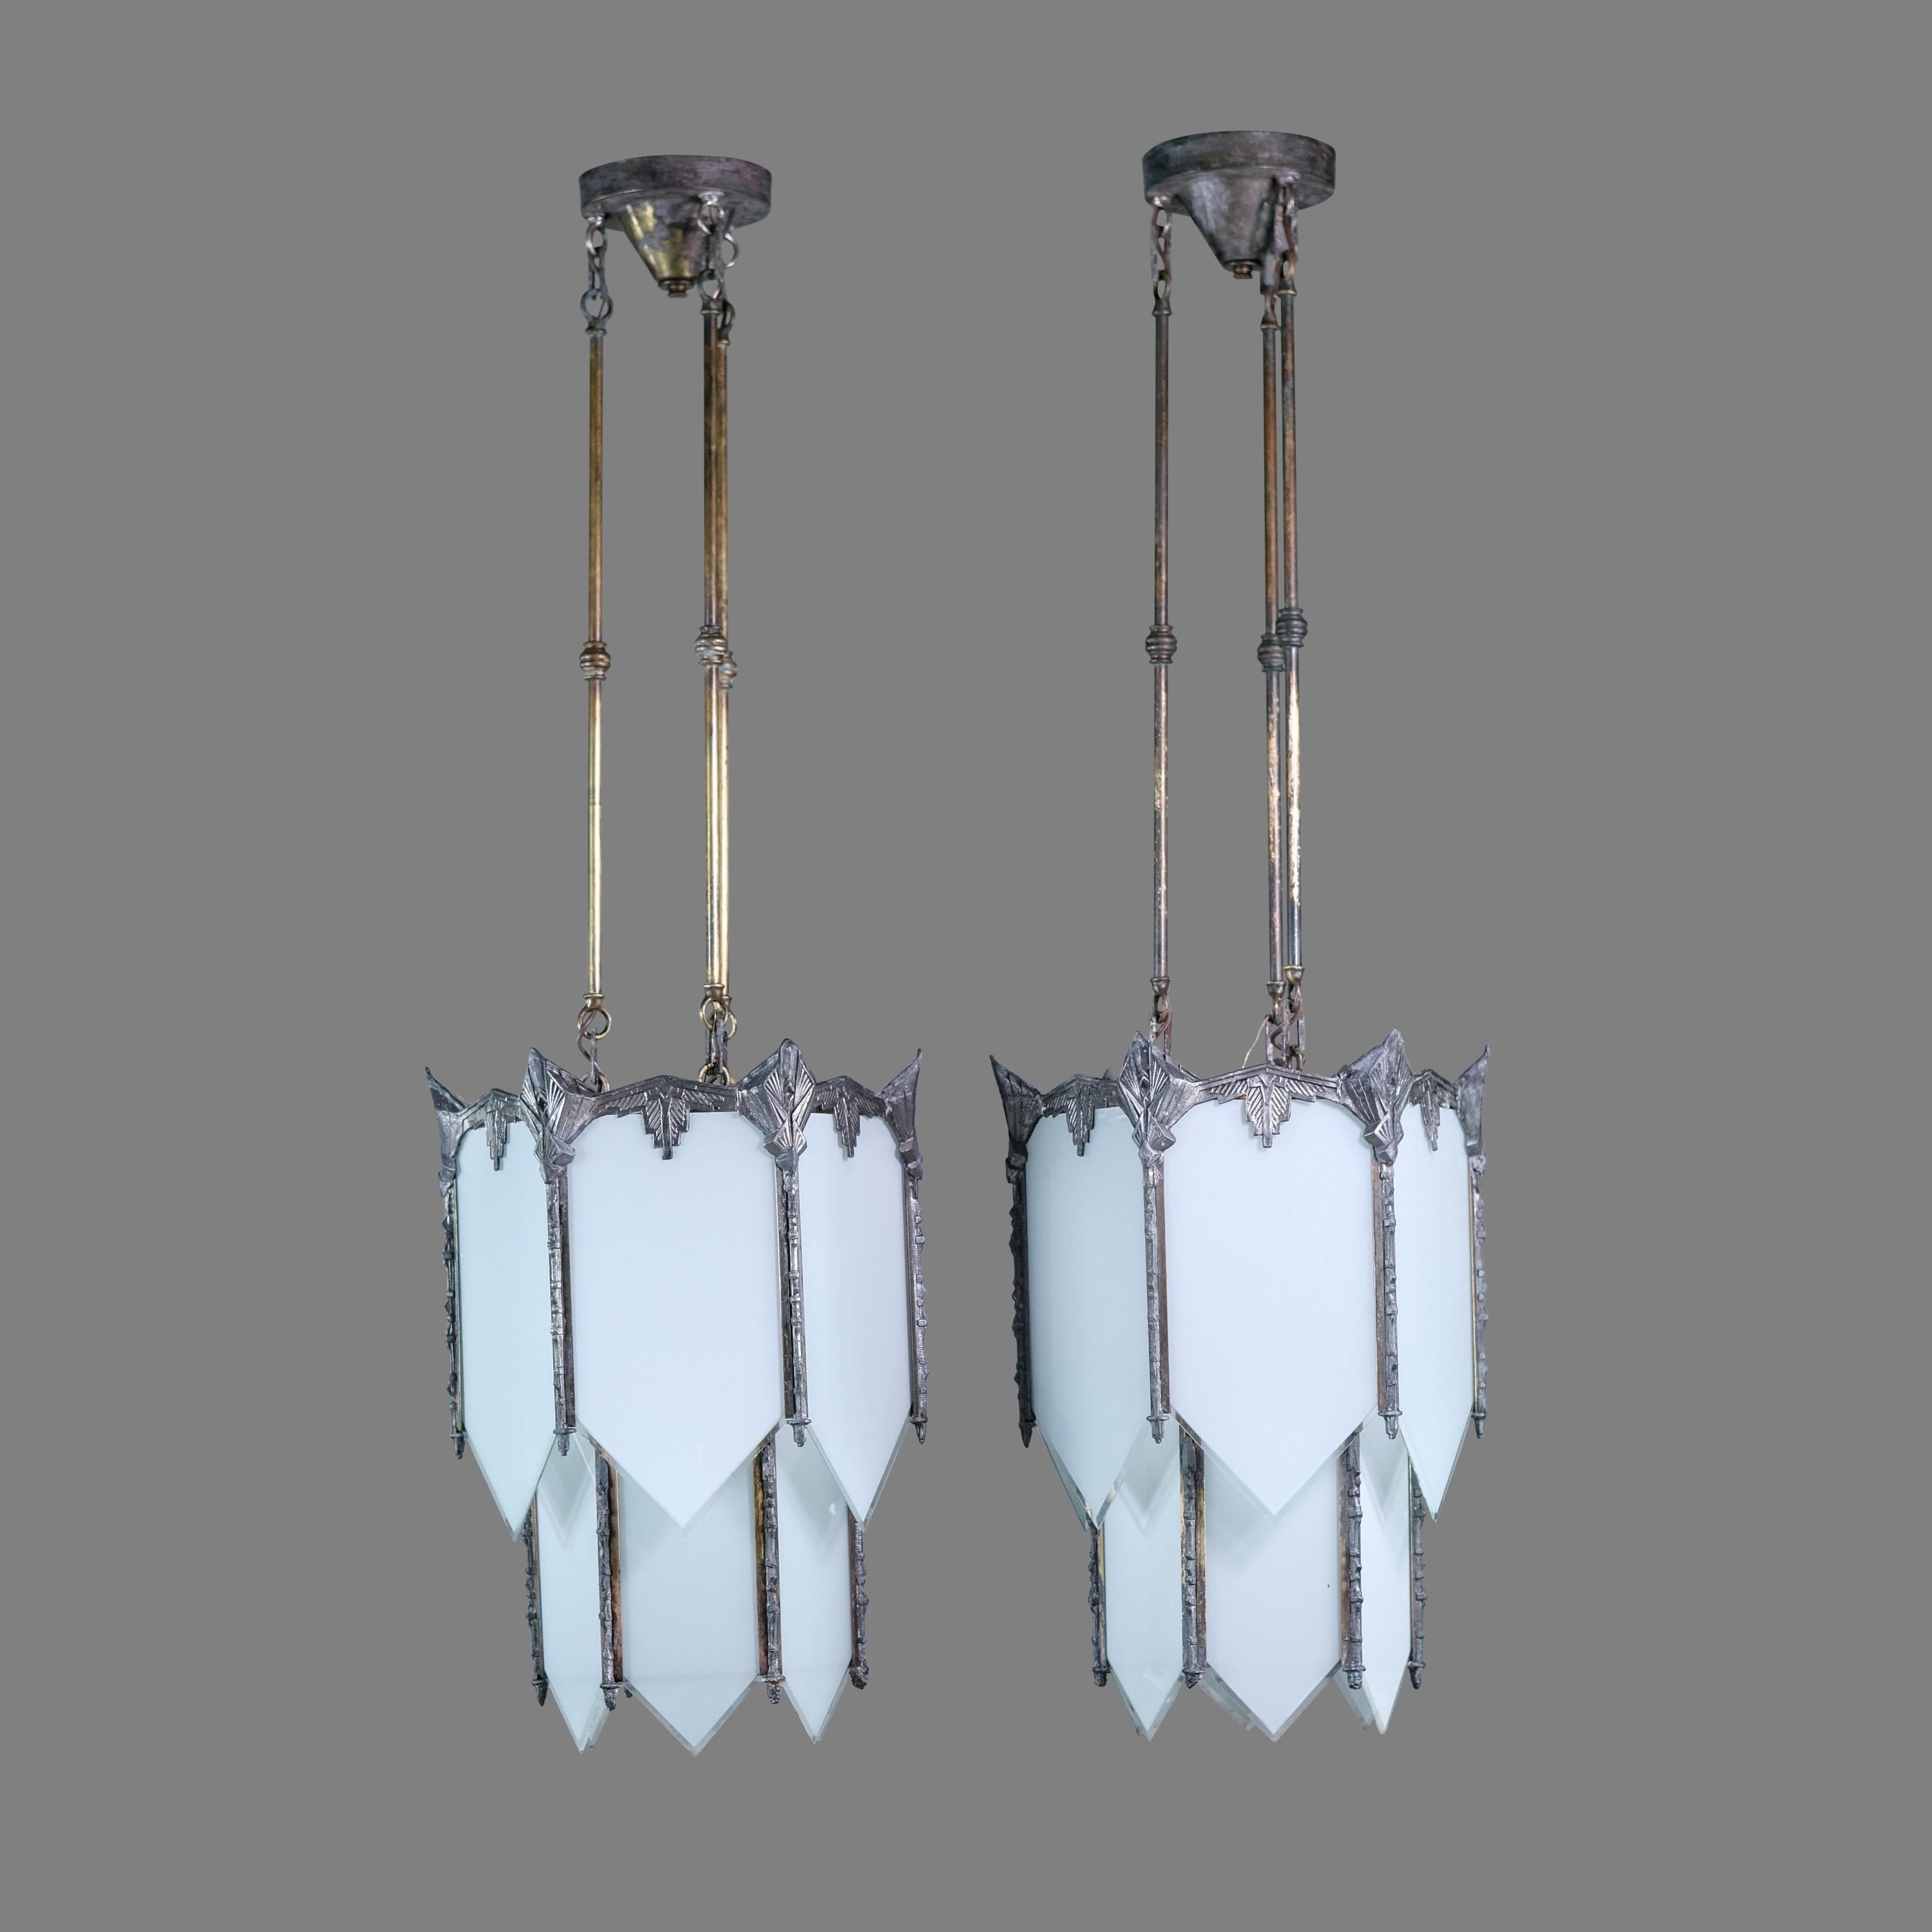 Early 20th century pendant lights done in an Art Deco style. Each fixture is nickel plated. White beveled glass completes this iconic look. Each light has three standard household E-26 lightbulb sockets. Cleaned and rewired. Chain allows the